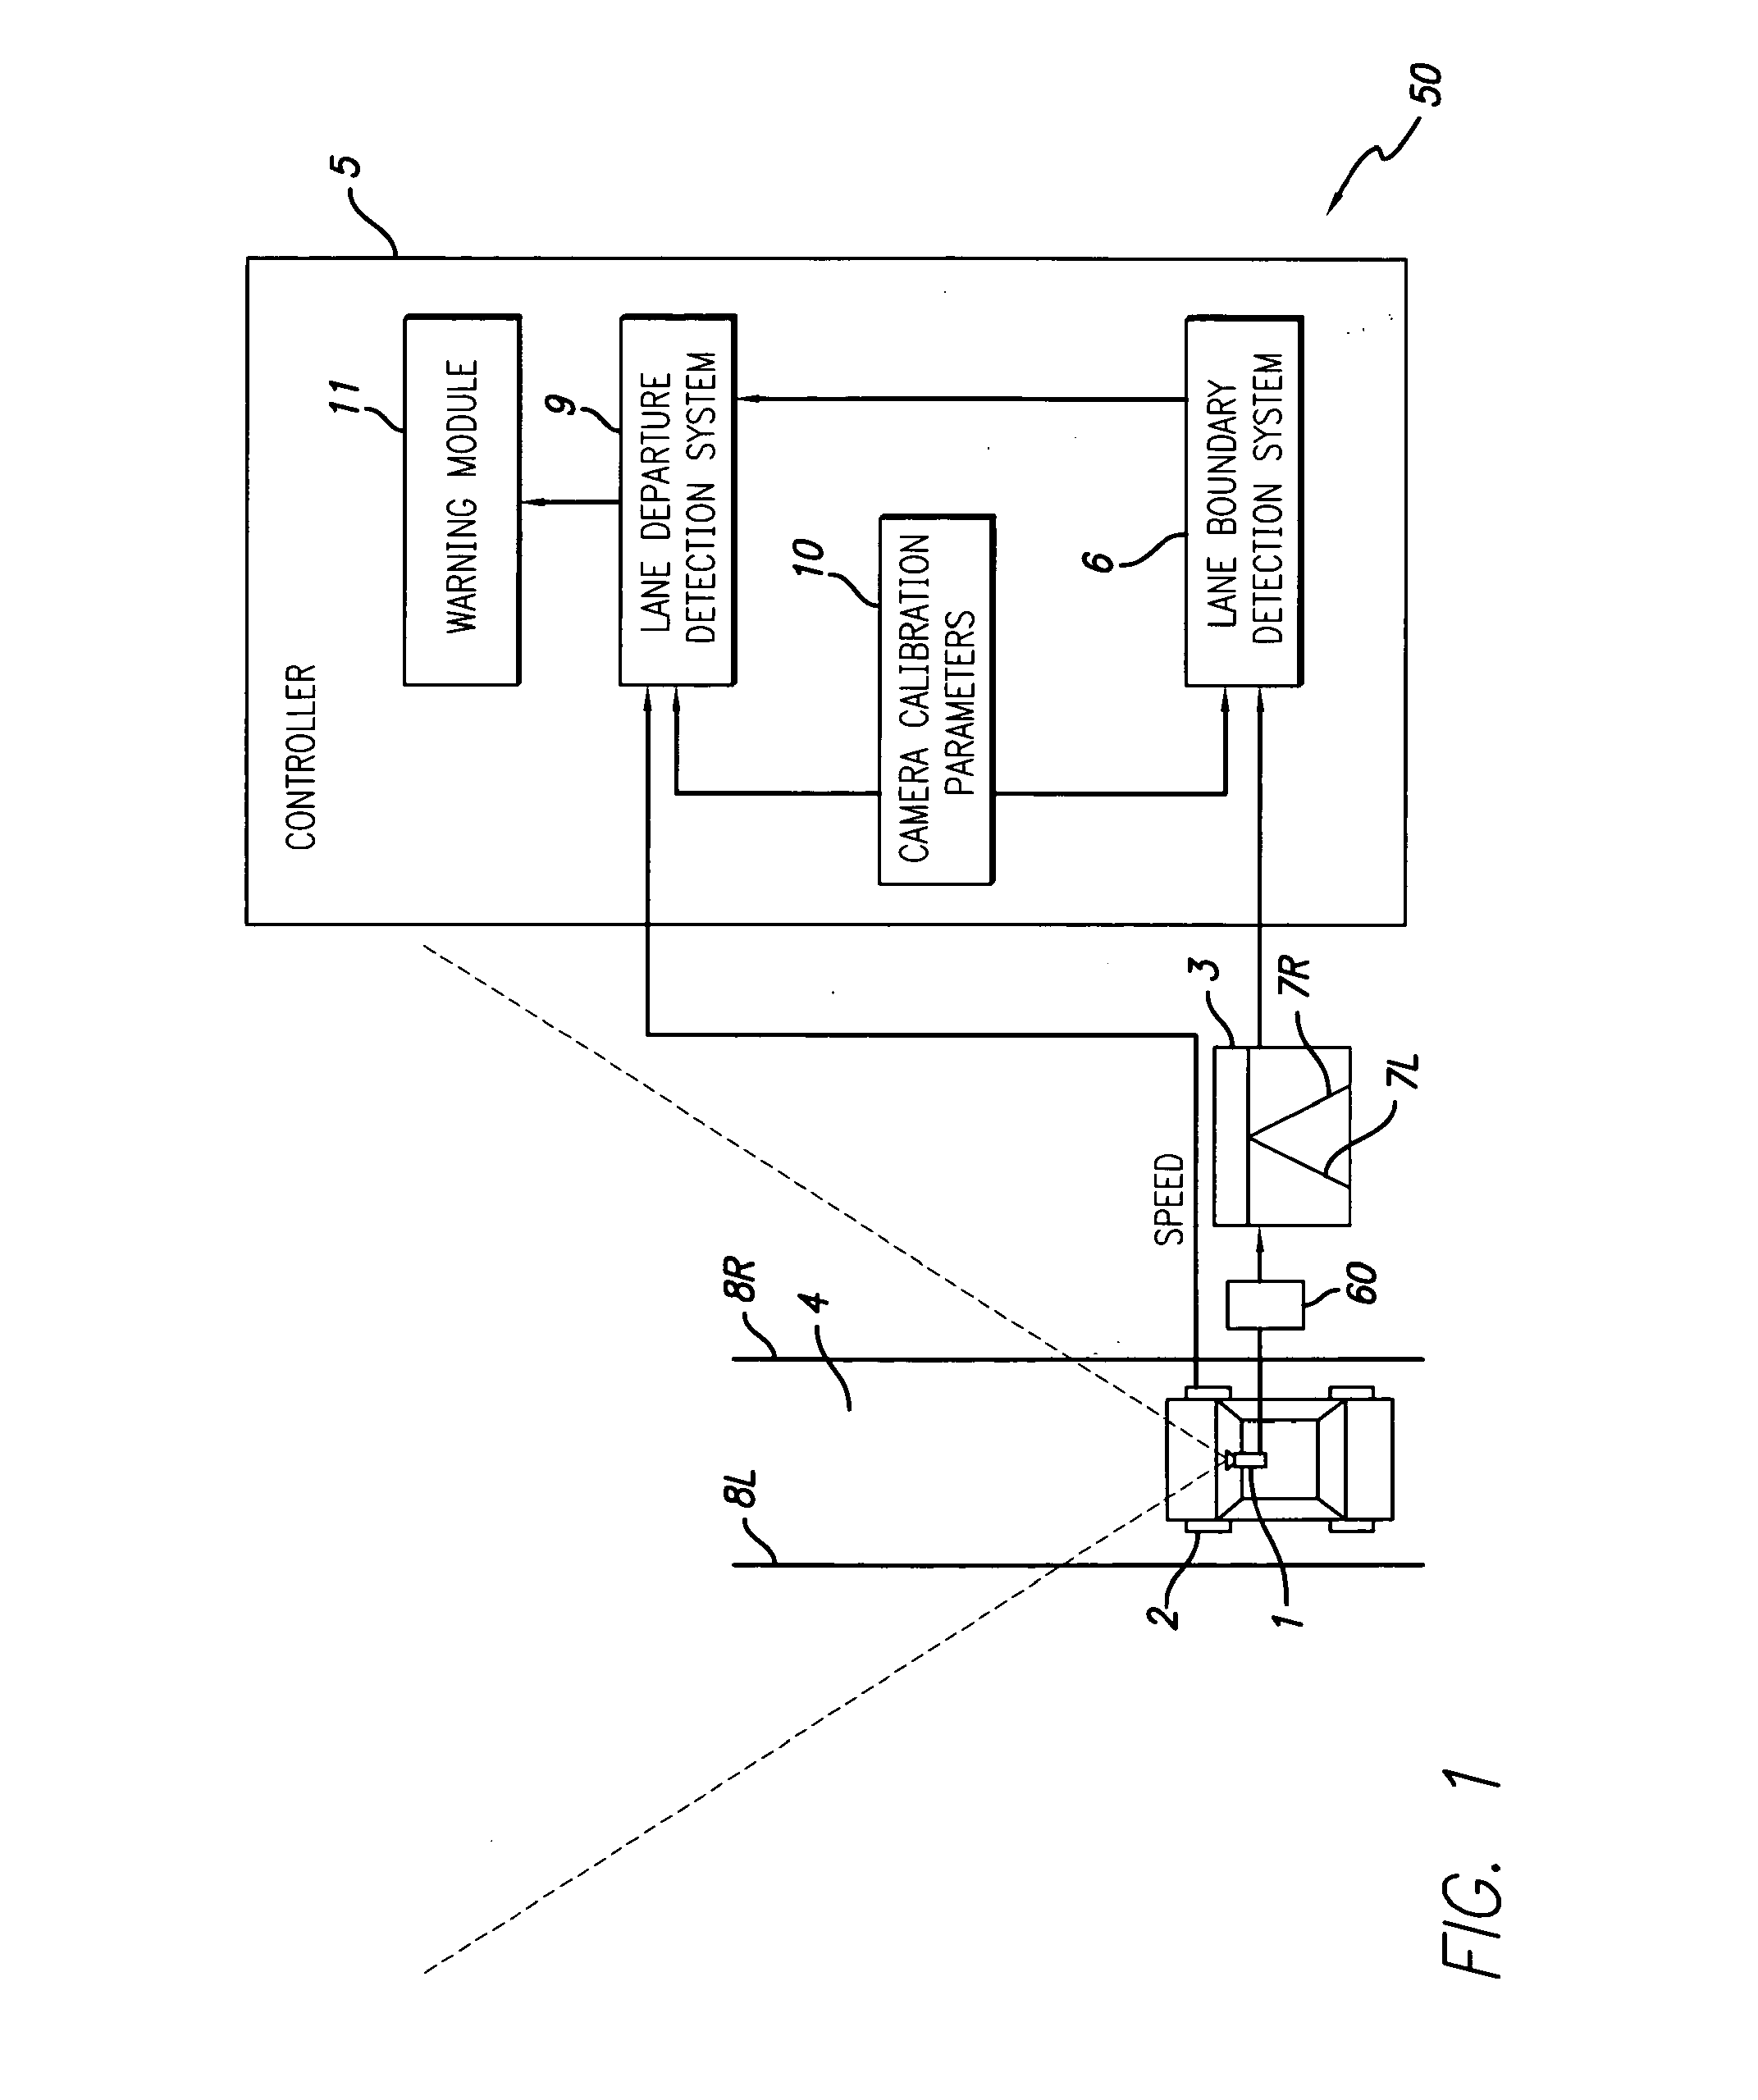 Method and system for universal lane boundary detection